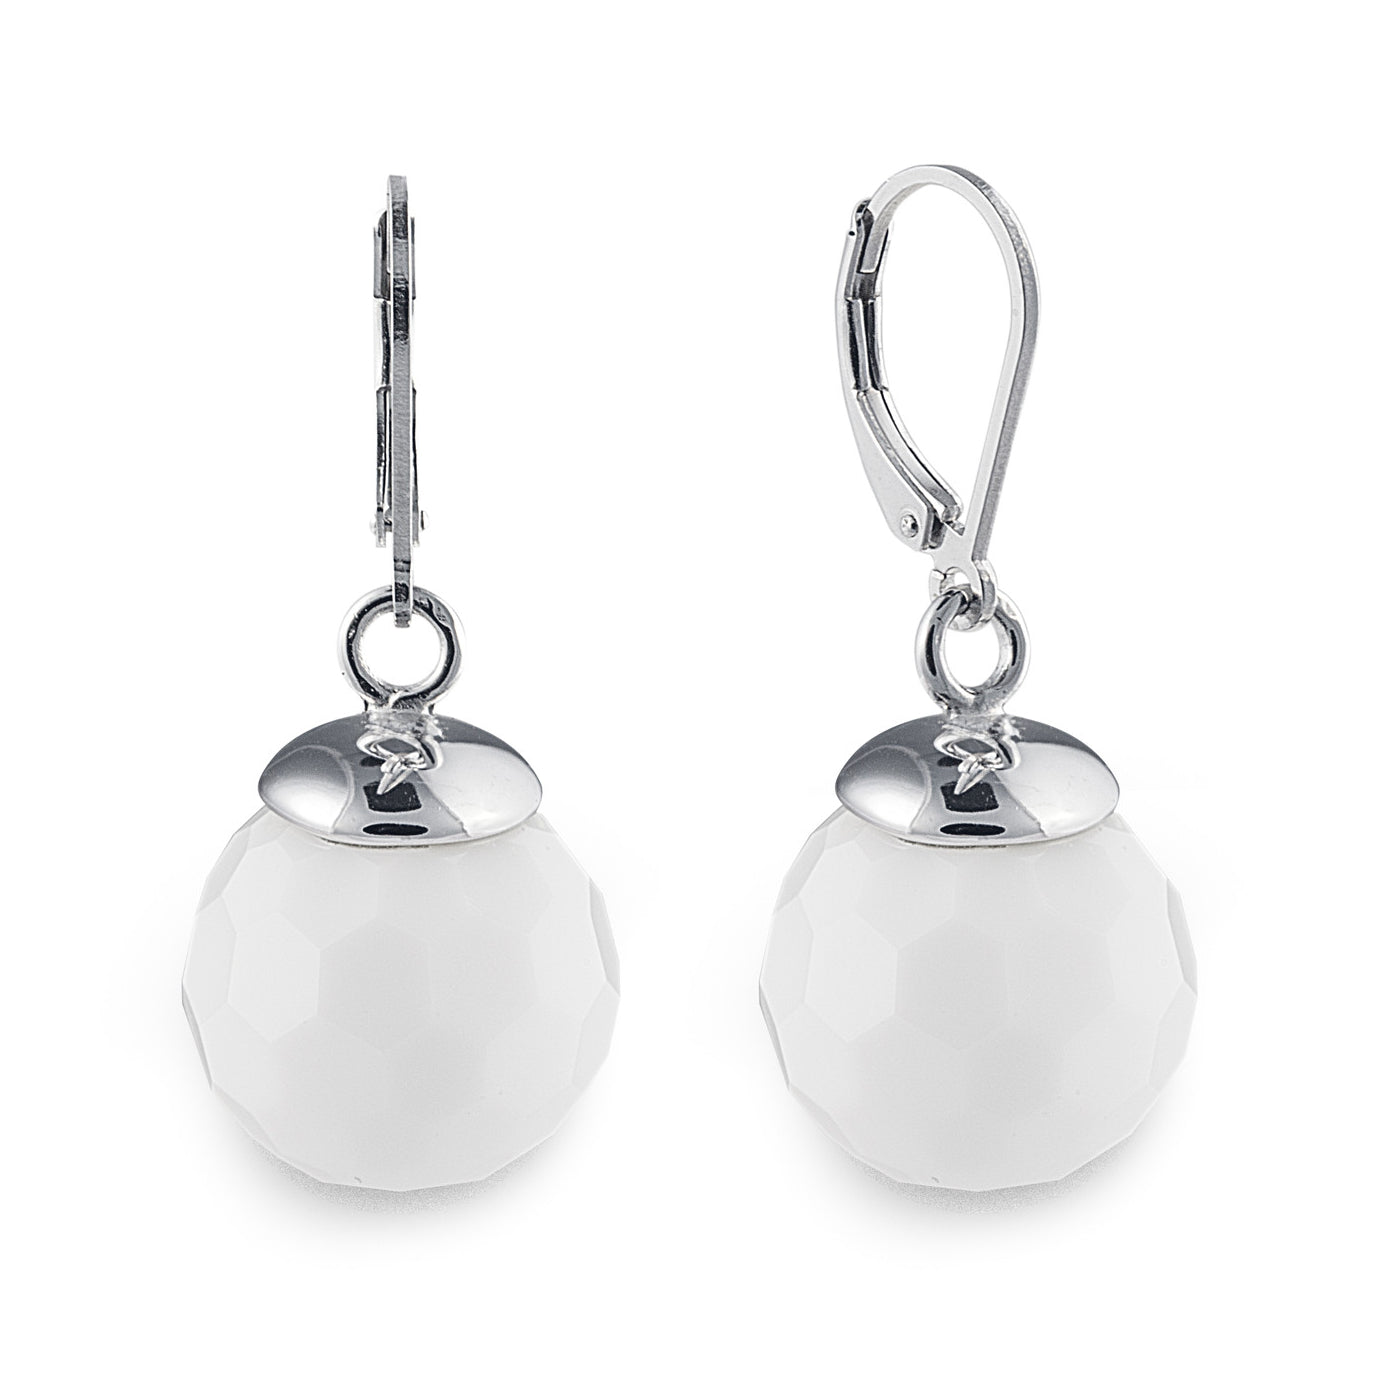 The Snow White Lopez Drop Earrings are made of 925 sterling silver and feature facet-cut white onyx with European ear hooks. Simple elegance suitable for everyday wear. More colours and matching rings are available. Jewellery by Bellagio & Co. Worldwide Shipping. Free shipping for orders over $150.00 within Australia.